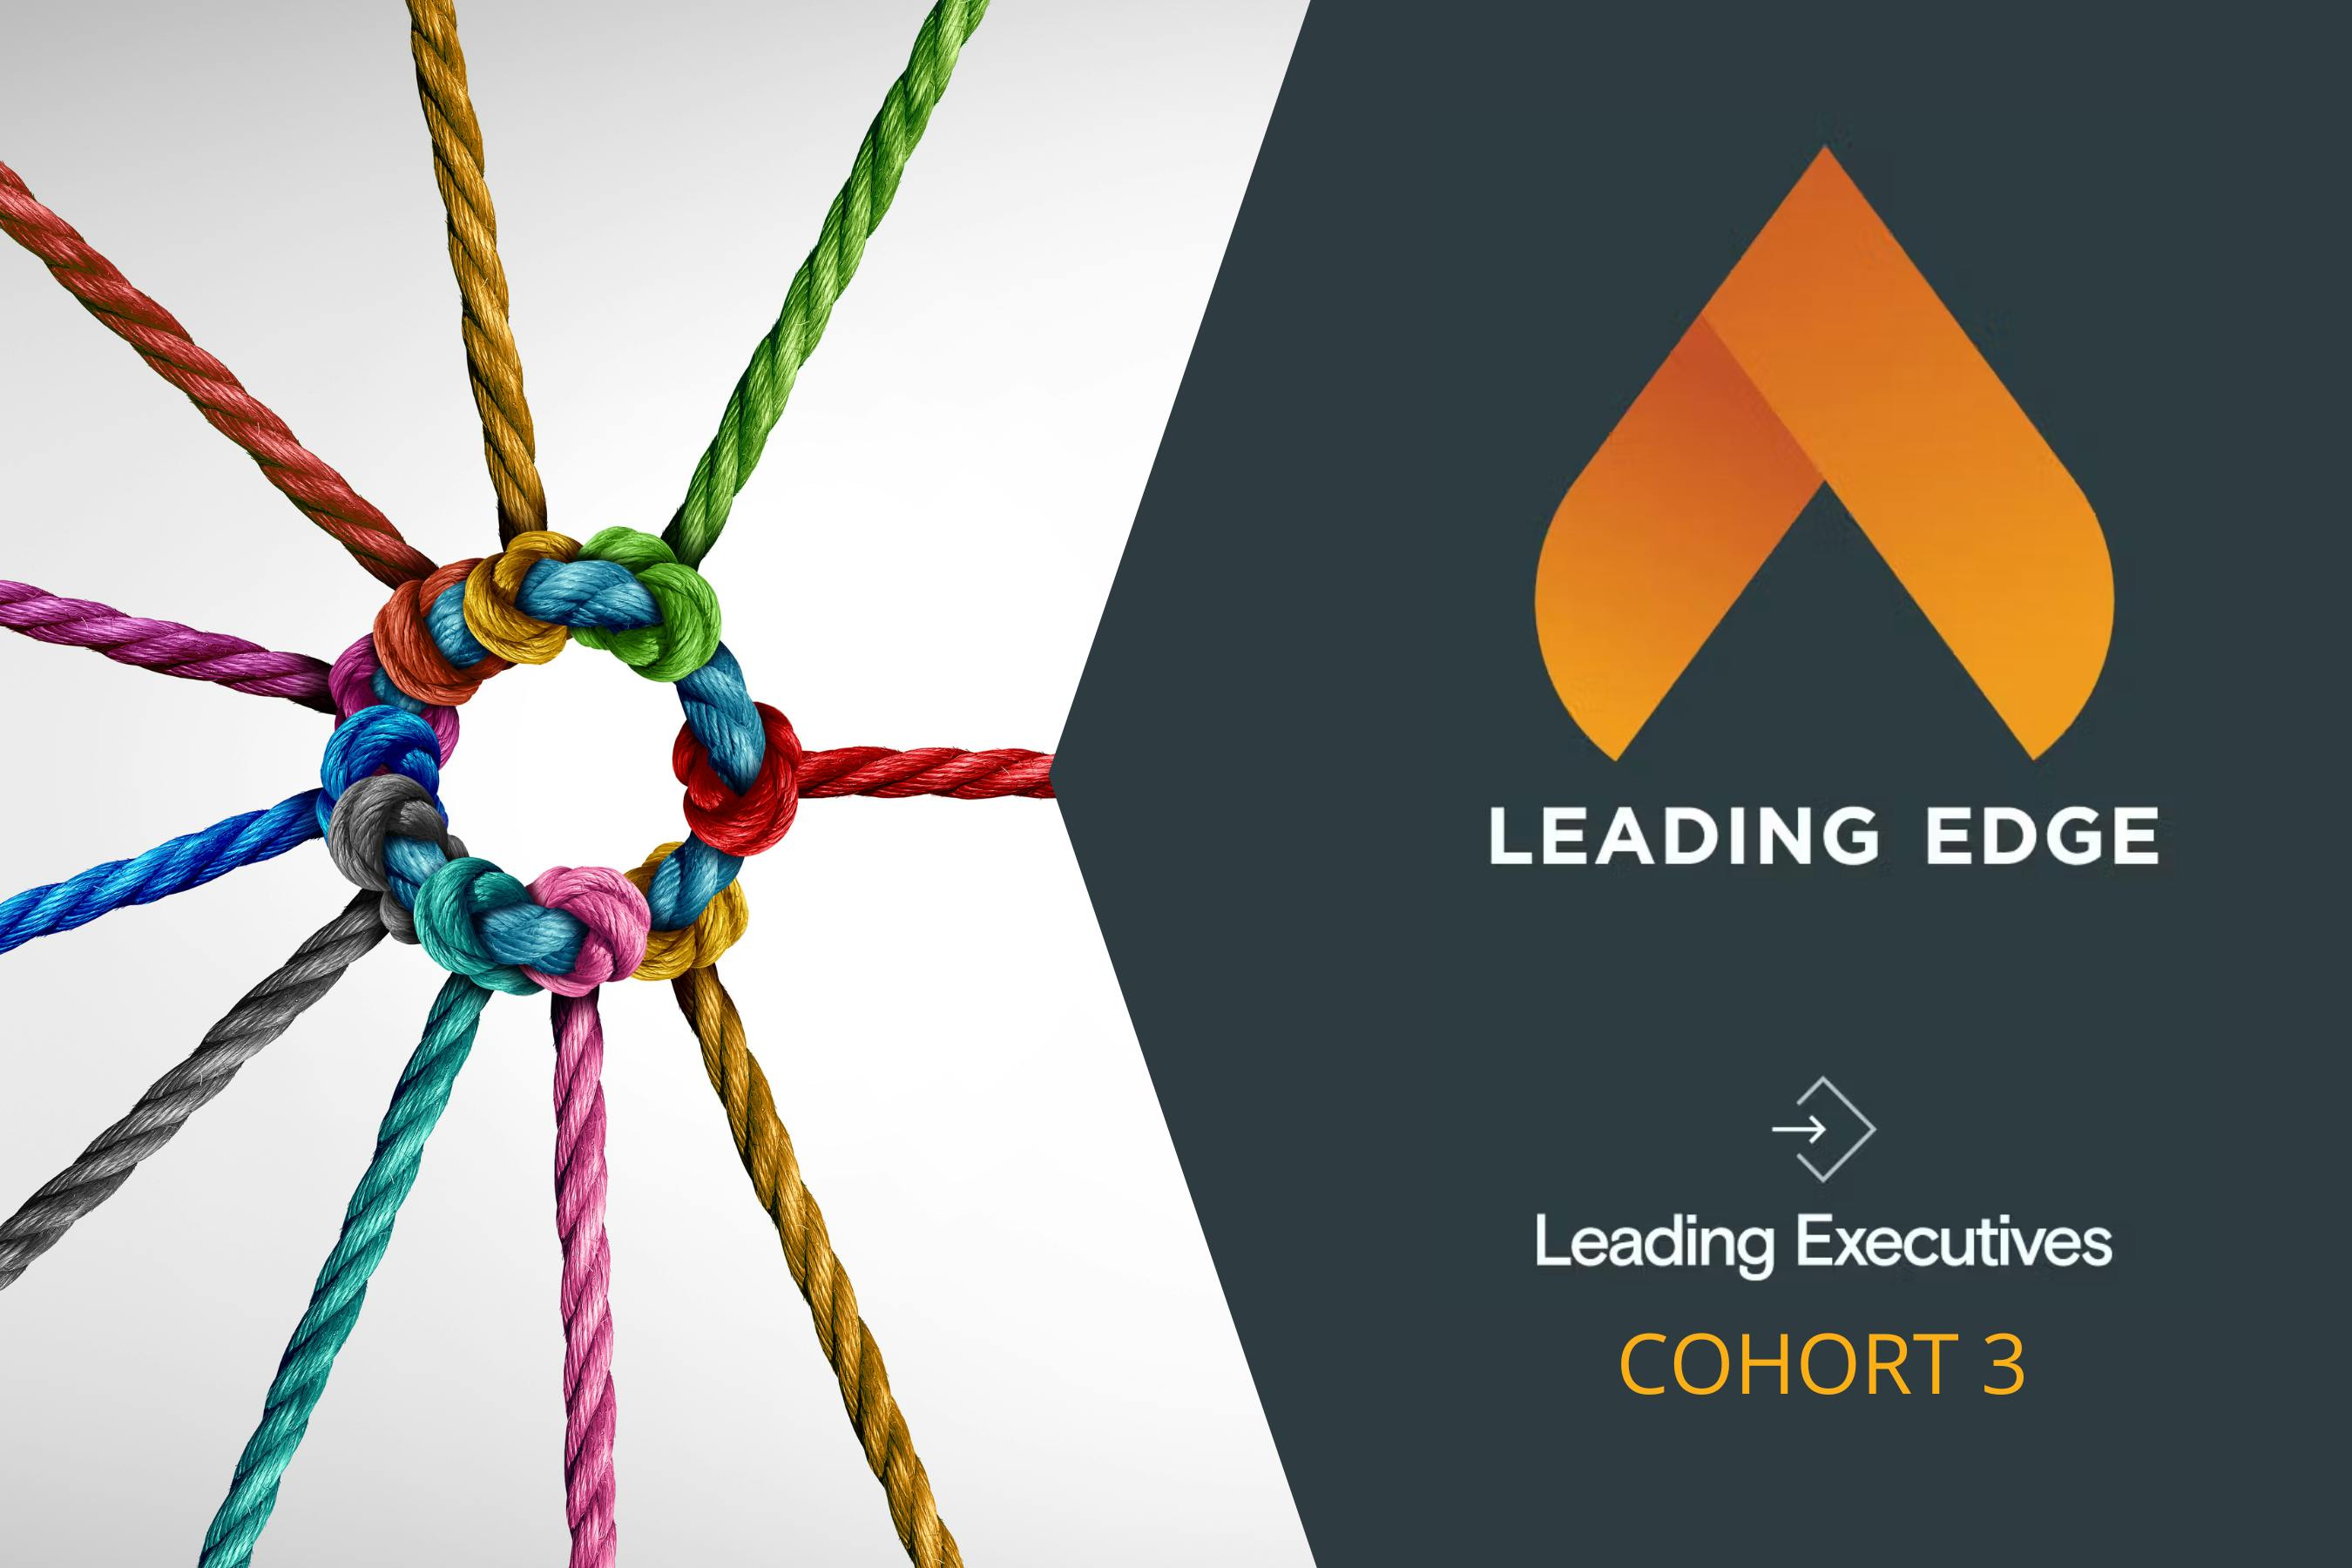 Colorful ropes image overlaid with text (Leading Executives Program Cohort 3)